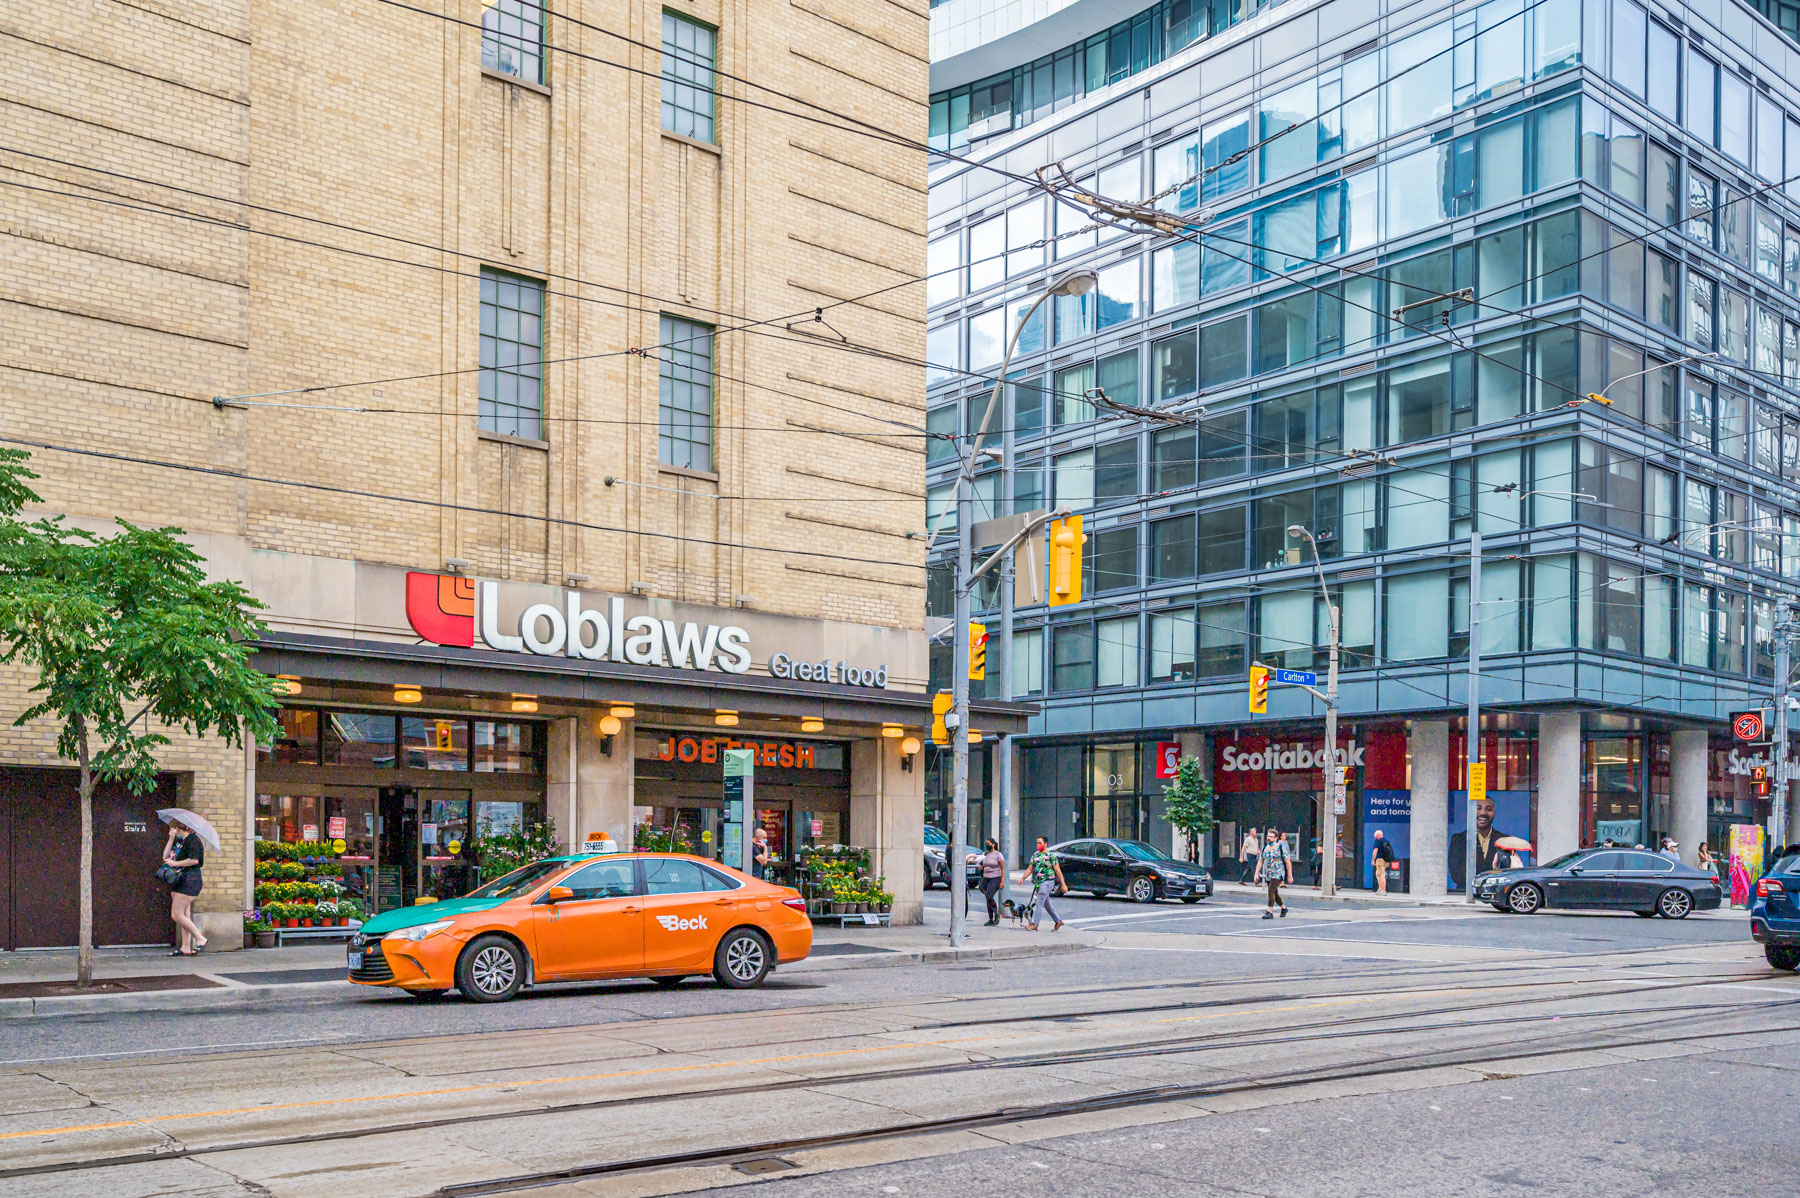 Loblaws and Scotiabank in Toronto's Bay St Corridor.